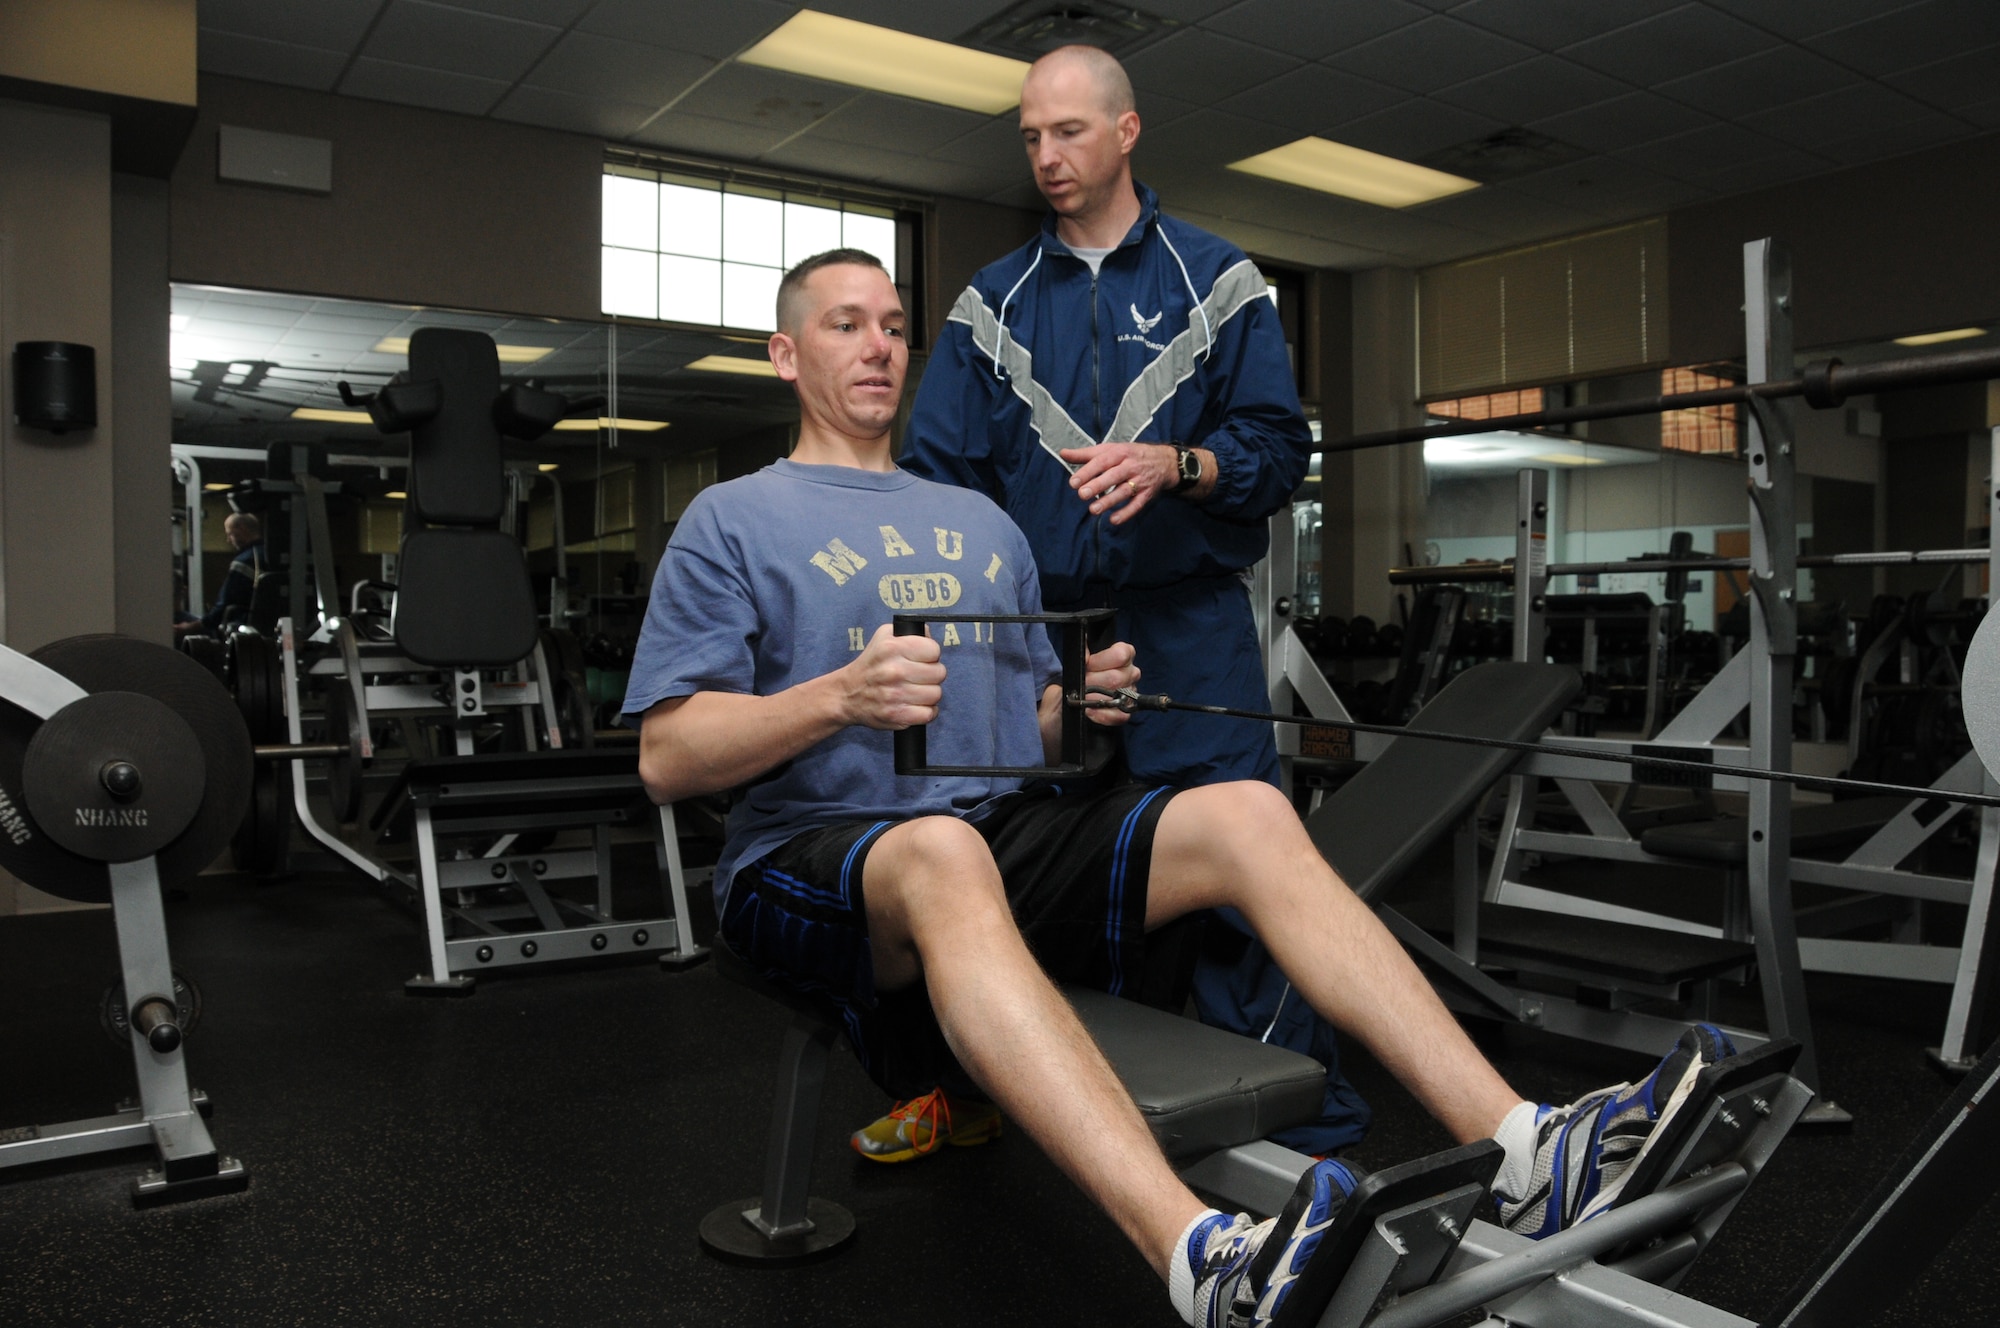 PEASE AIR NATIONAL GUARD BASE, N.H -- Tech. Sgt. Rob Rojek, 157th Force Support Squadron, assists Master Sgt. Jeffrey Vermette, Judge Advocate paralegal, with form in the weight room in Building 100 May 6. Rojek, a wellness and sports director for the Concord YMCA, worked with directors to establish a military membership program. (National Guard photo by Staff Sgt. Curtis J. Lenz/RELEASED)